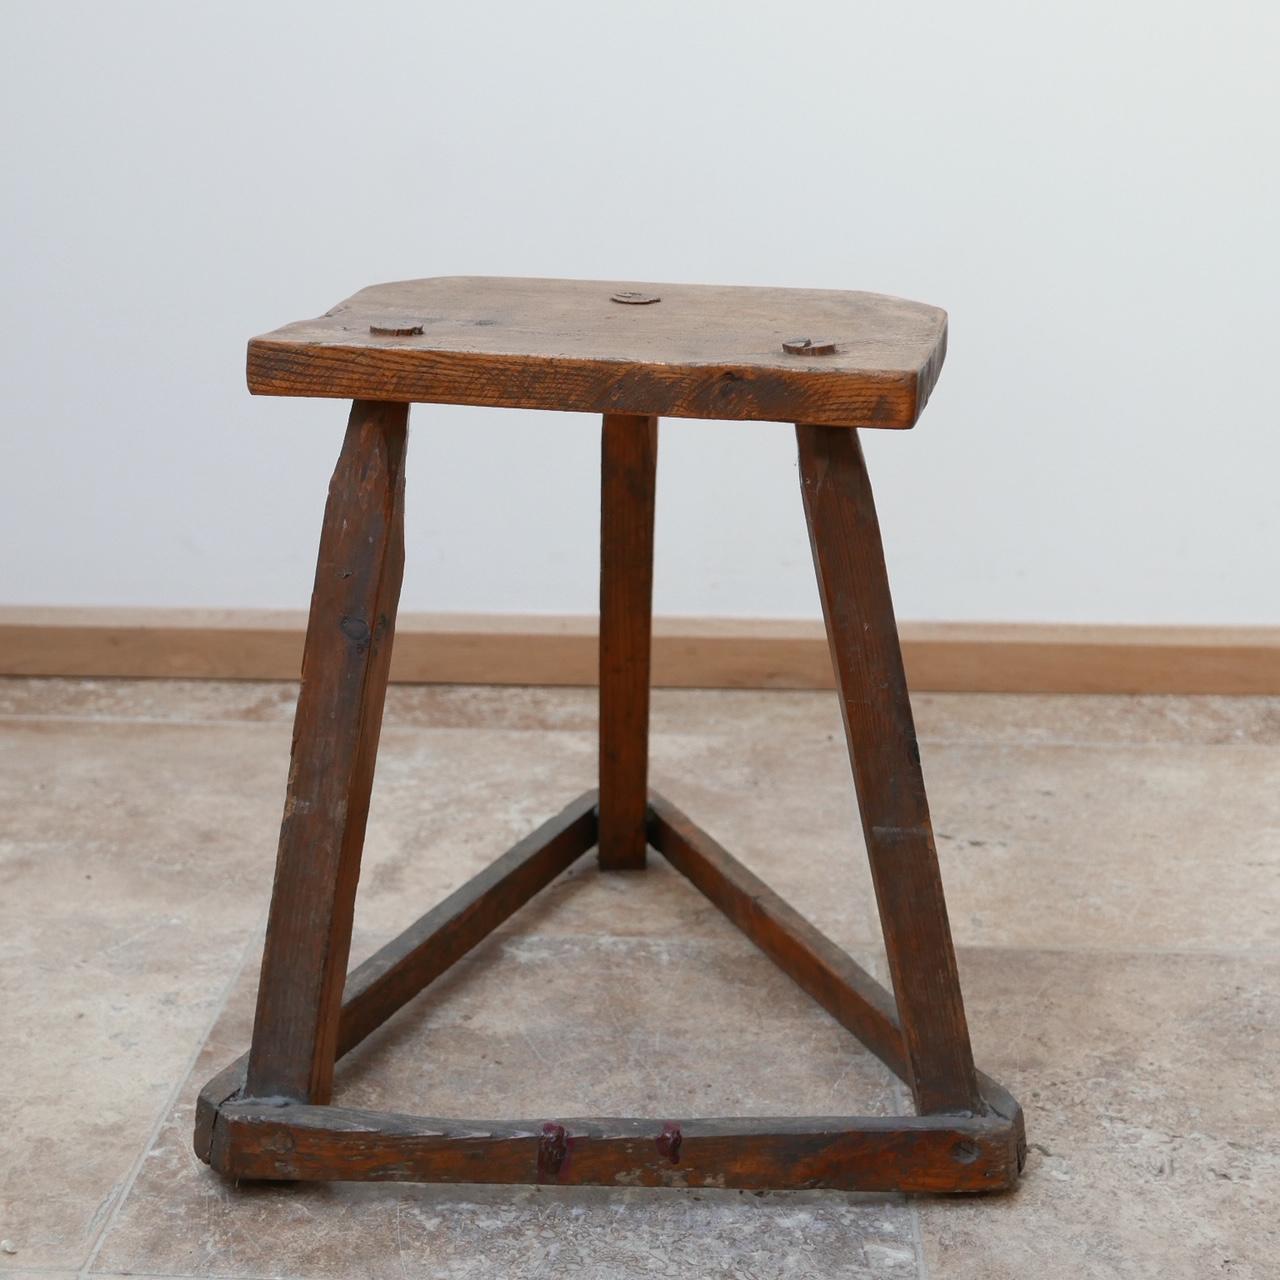 An antique wooden cutler's stool salvaged from Birmingham's Jewellery quarter.

England, late 19th century.

Originally used as a stool but ideal as a naive side table.

These stools look as good in an antique setting as well as a modern or